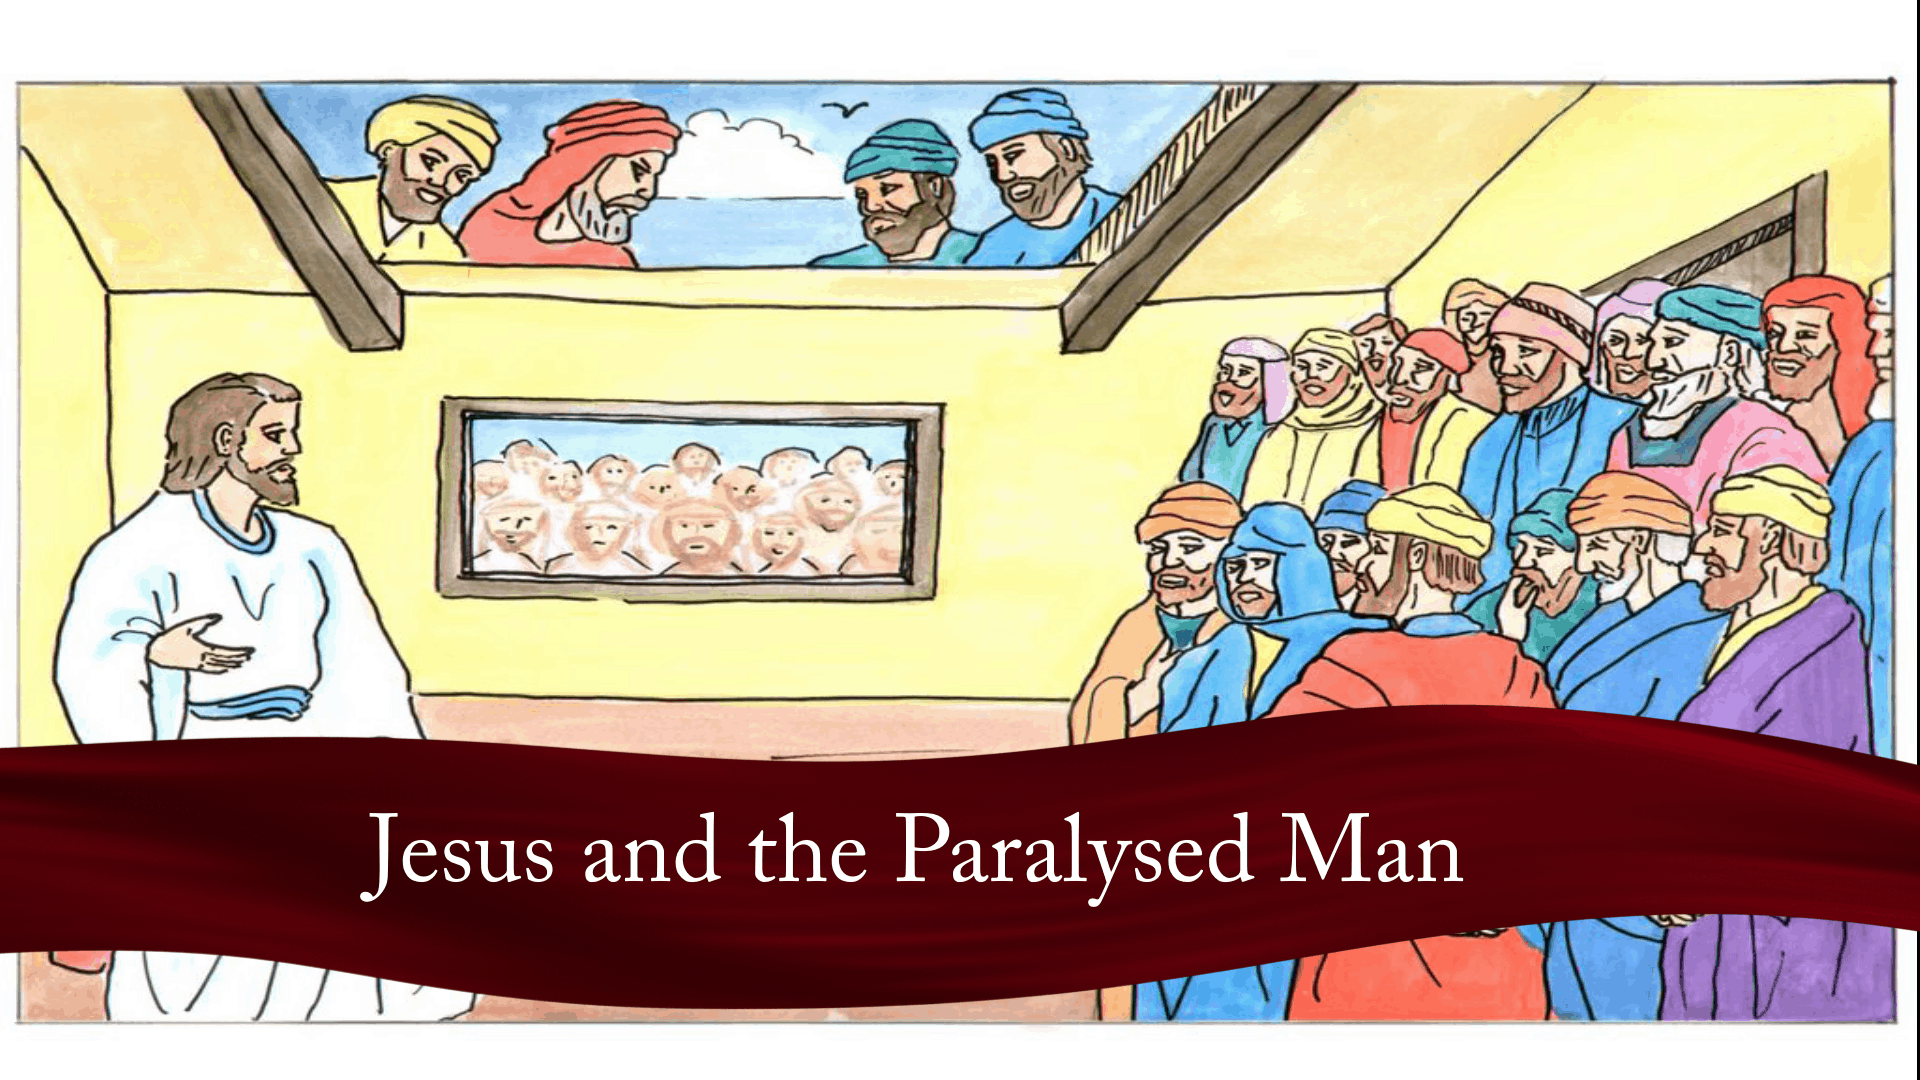 Jesus and the Paralysed Man